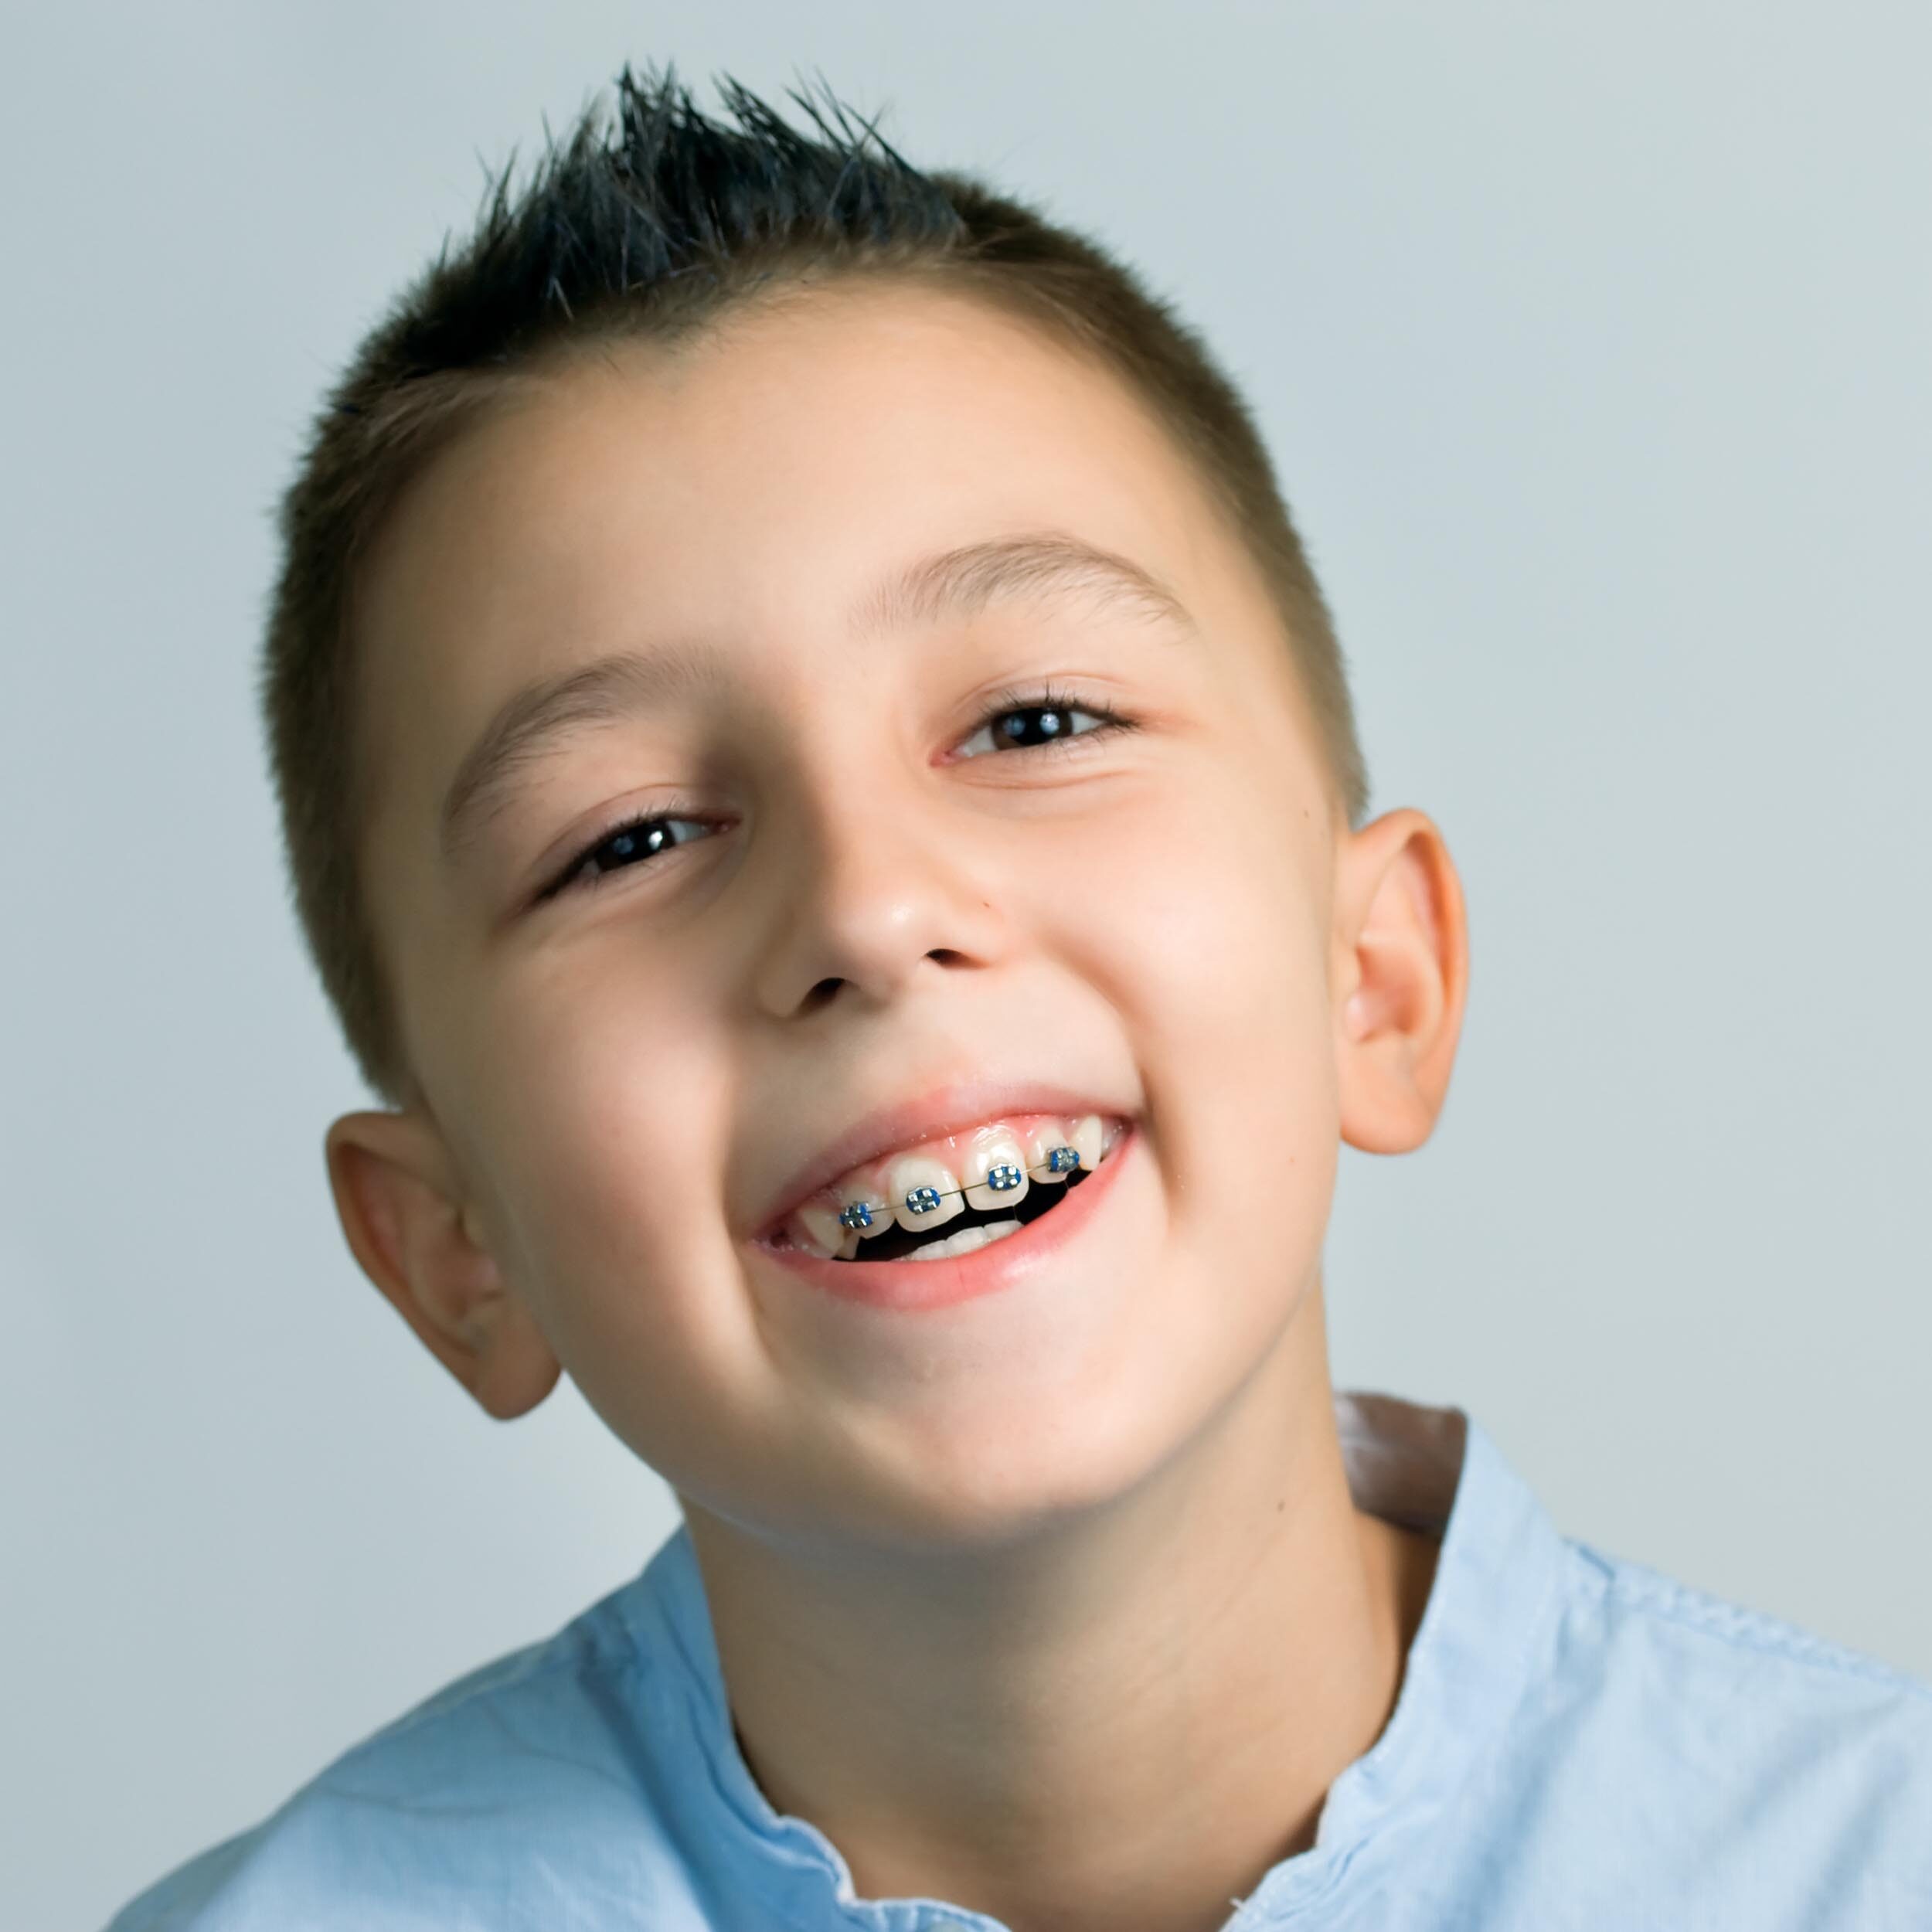 A smiling young boy showcasing his braces, a result of his orthodontic treatment.